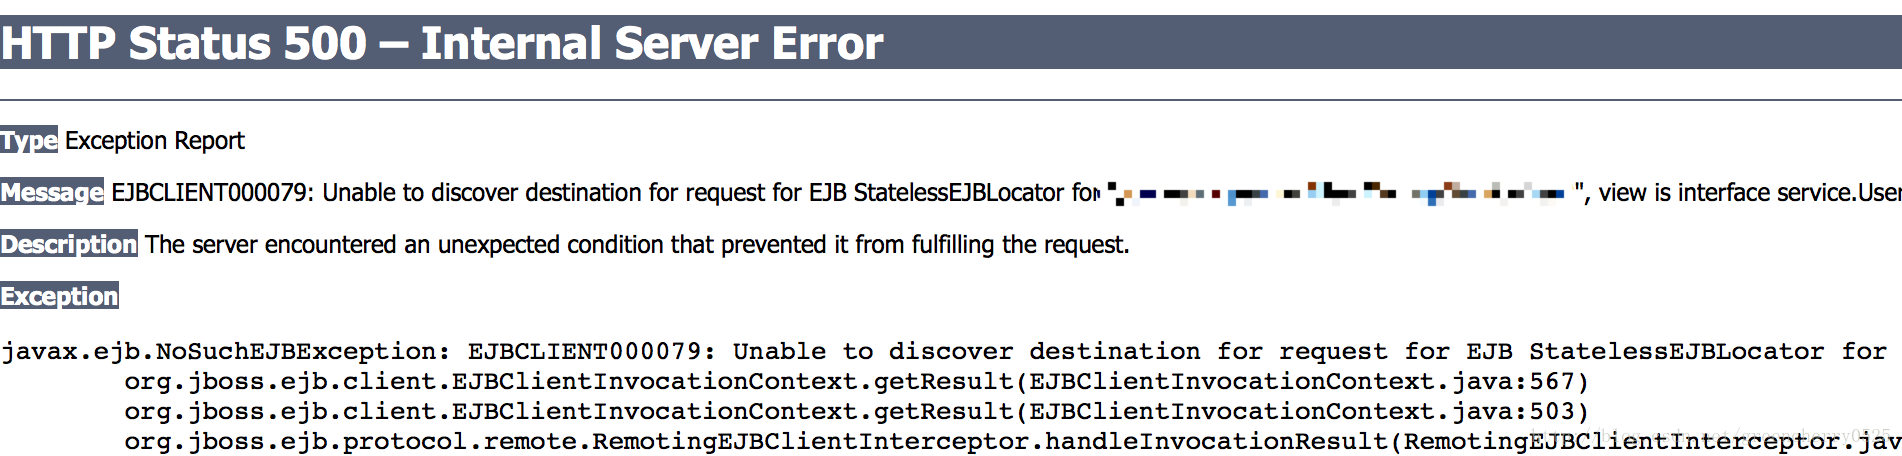 EJB错误:EJBCLIENT000079: Unable to discover destination for request for EJB StatelessEJBLocator